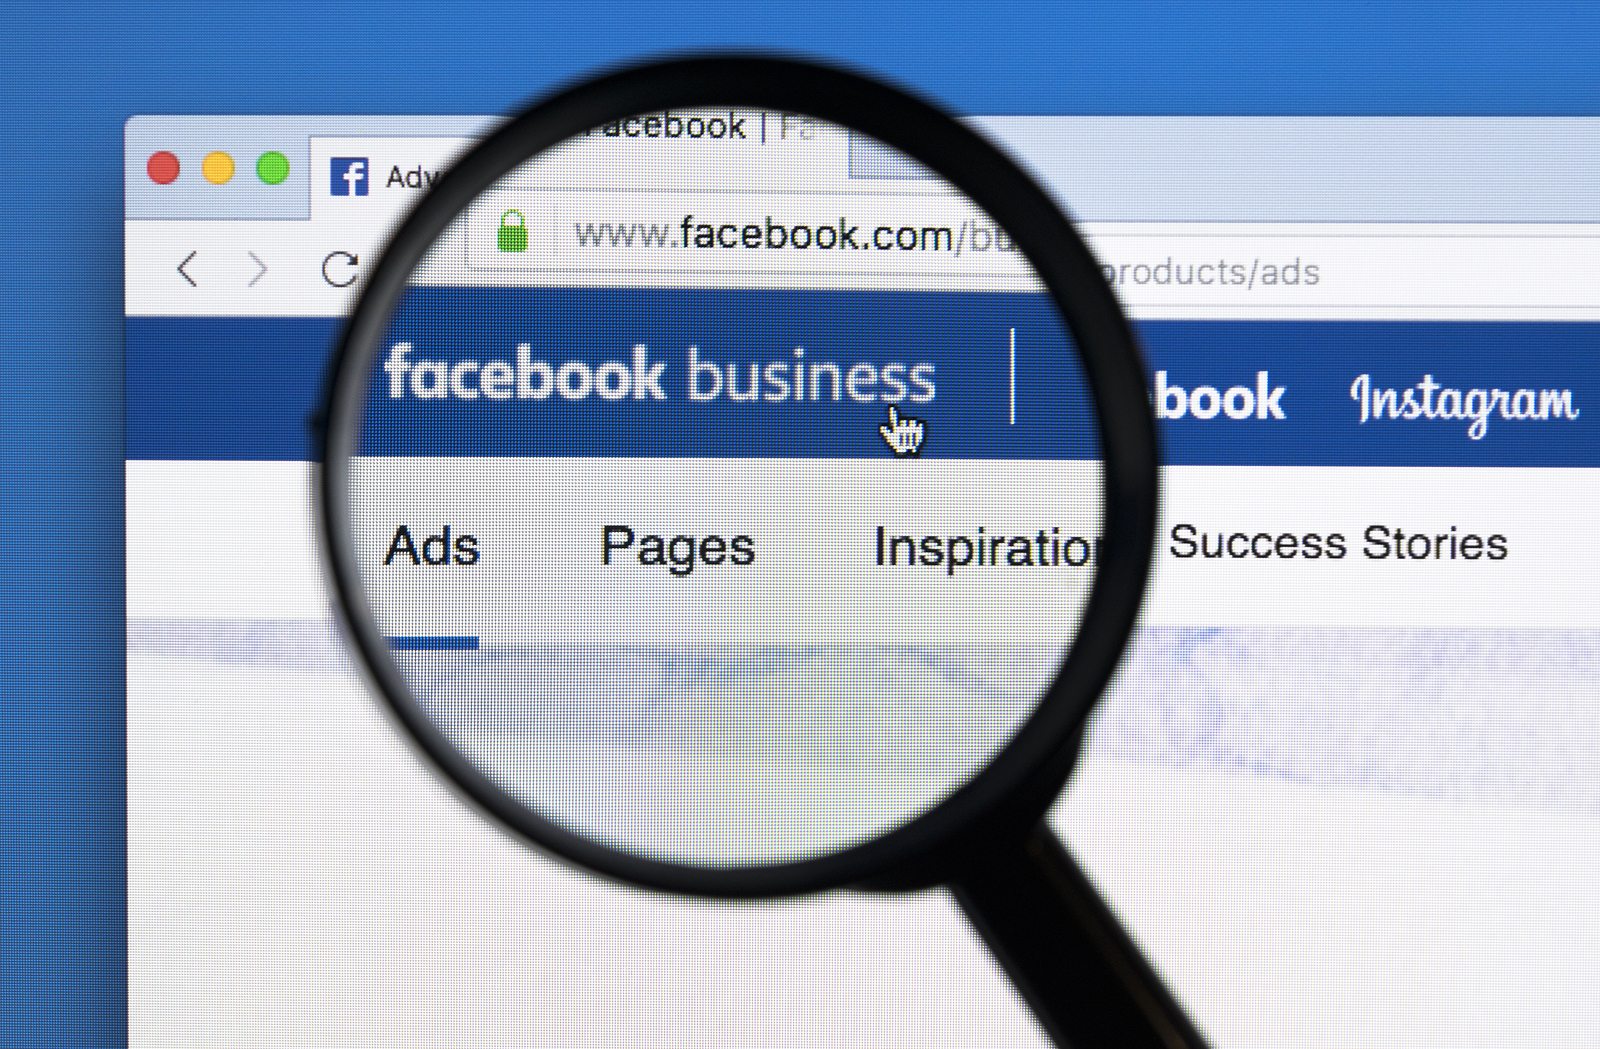 Should My Business Have a Facebook Business Page?